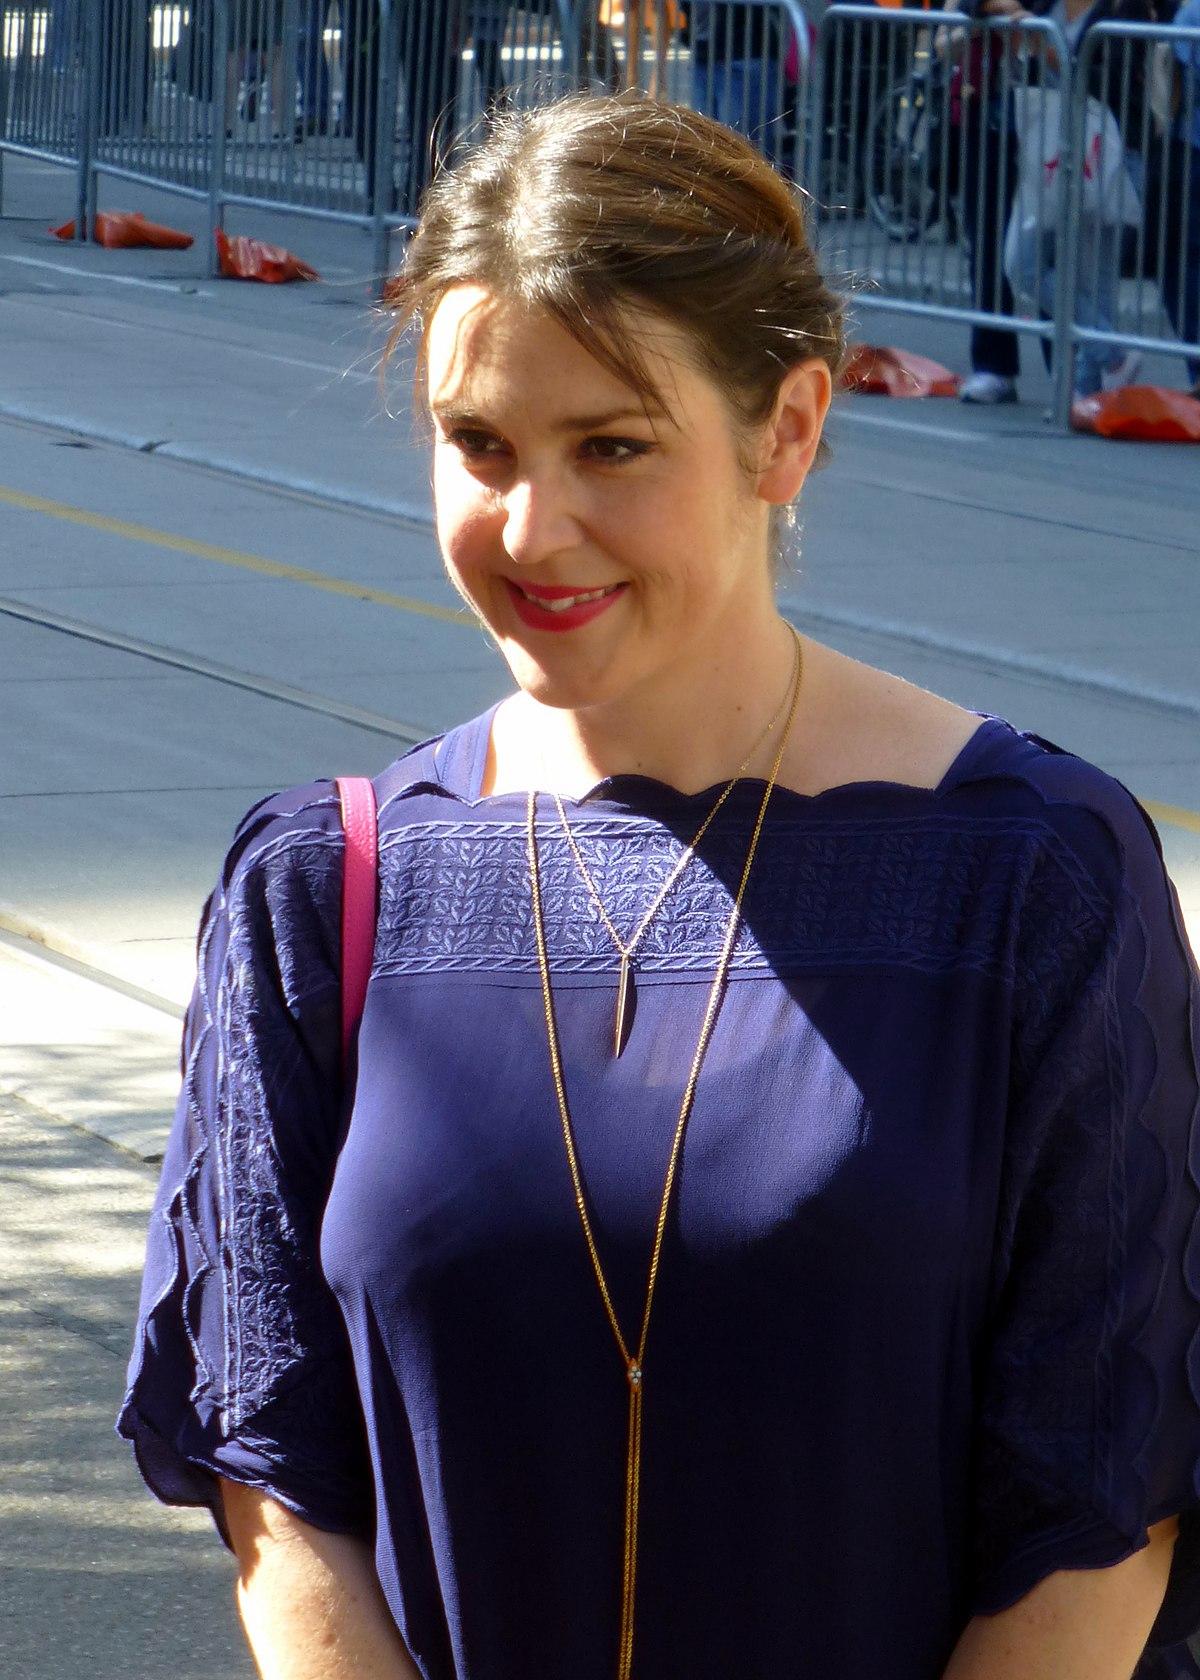 60+ Hot Pictures Of Melanie Lynskey Which Will Keep You Up At Nights 142